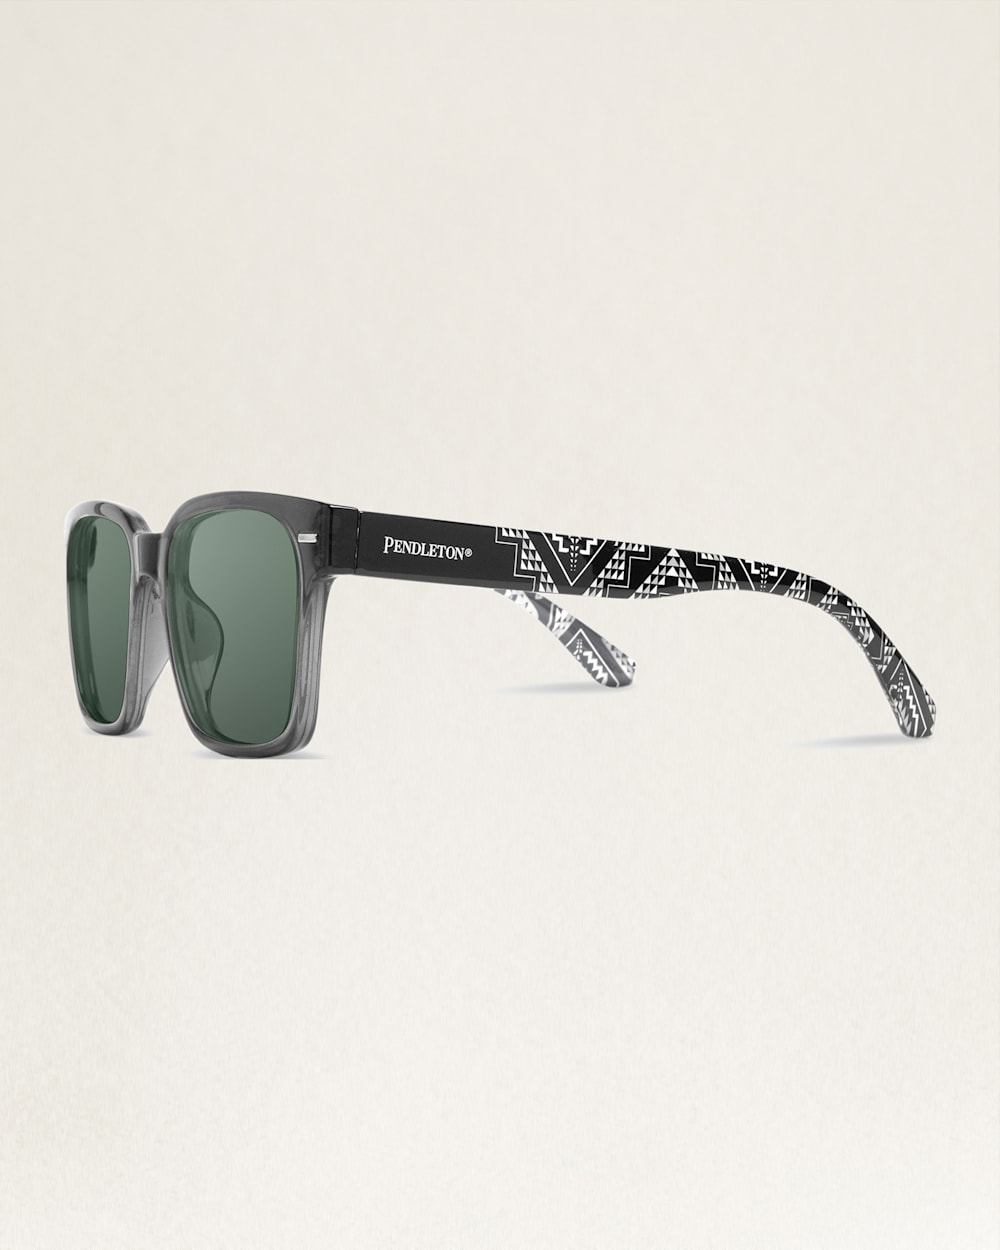 ALTERNATE VIEW OF SHWOOD X PENDLETON COBY POLARIZED SUNGLASSES IN GREY CRYSTAL/BLACK OXBOW image number 3